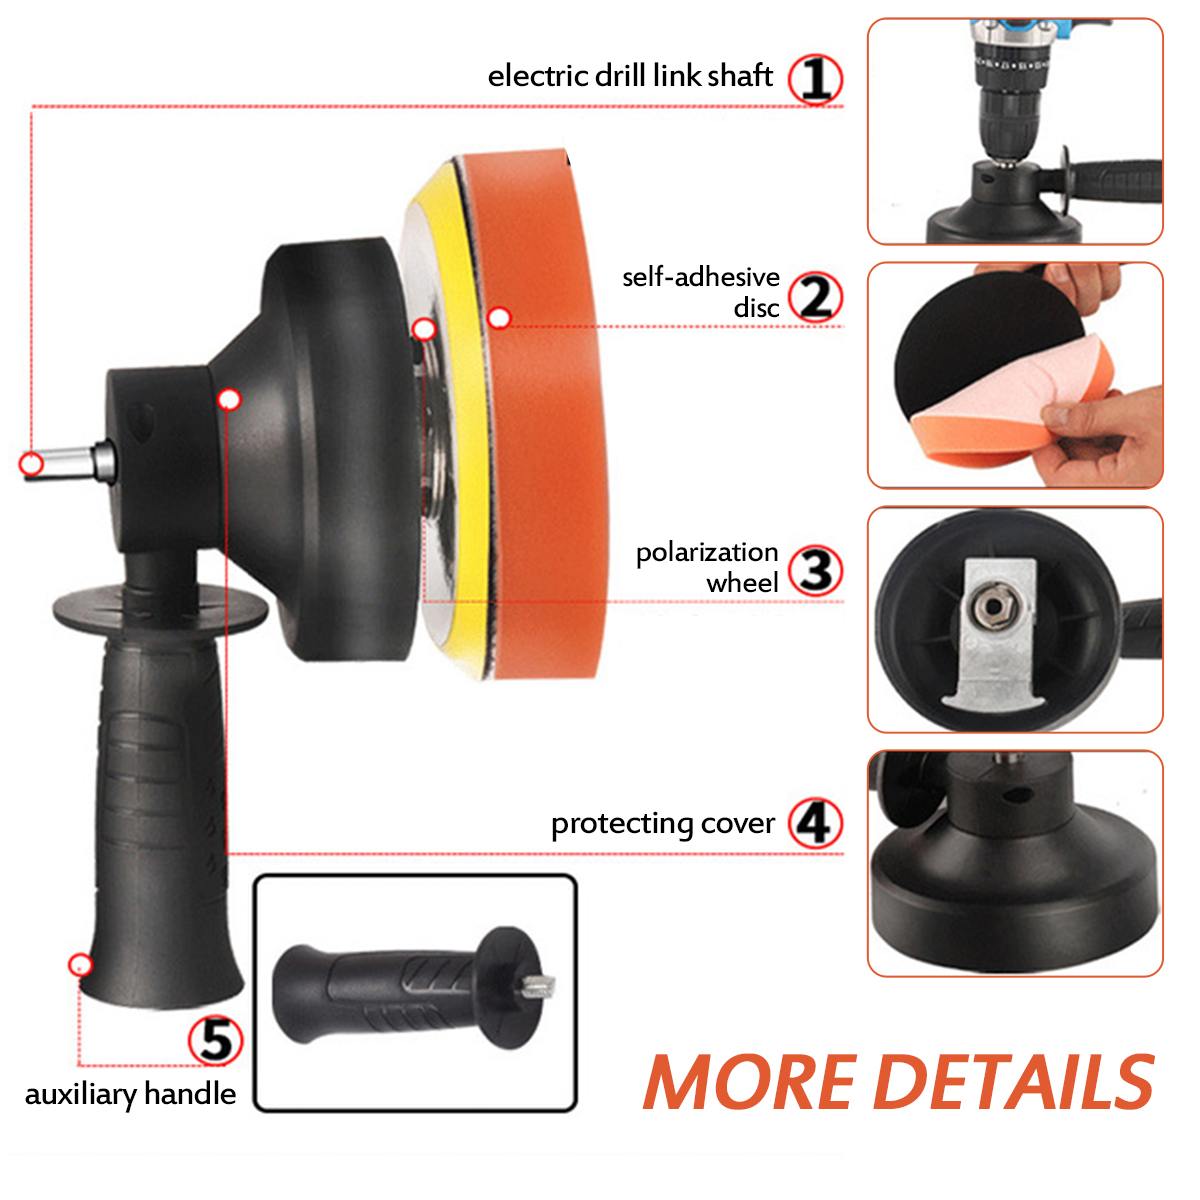 125mm-Electric-Polisher-Accessories-Set-Electric-Drill-to-Polish-Machine-Conversion-Head-For-Polishi-1918289-8